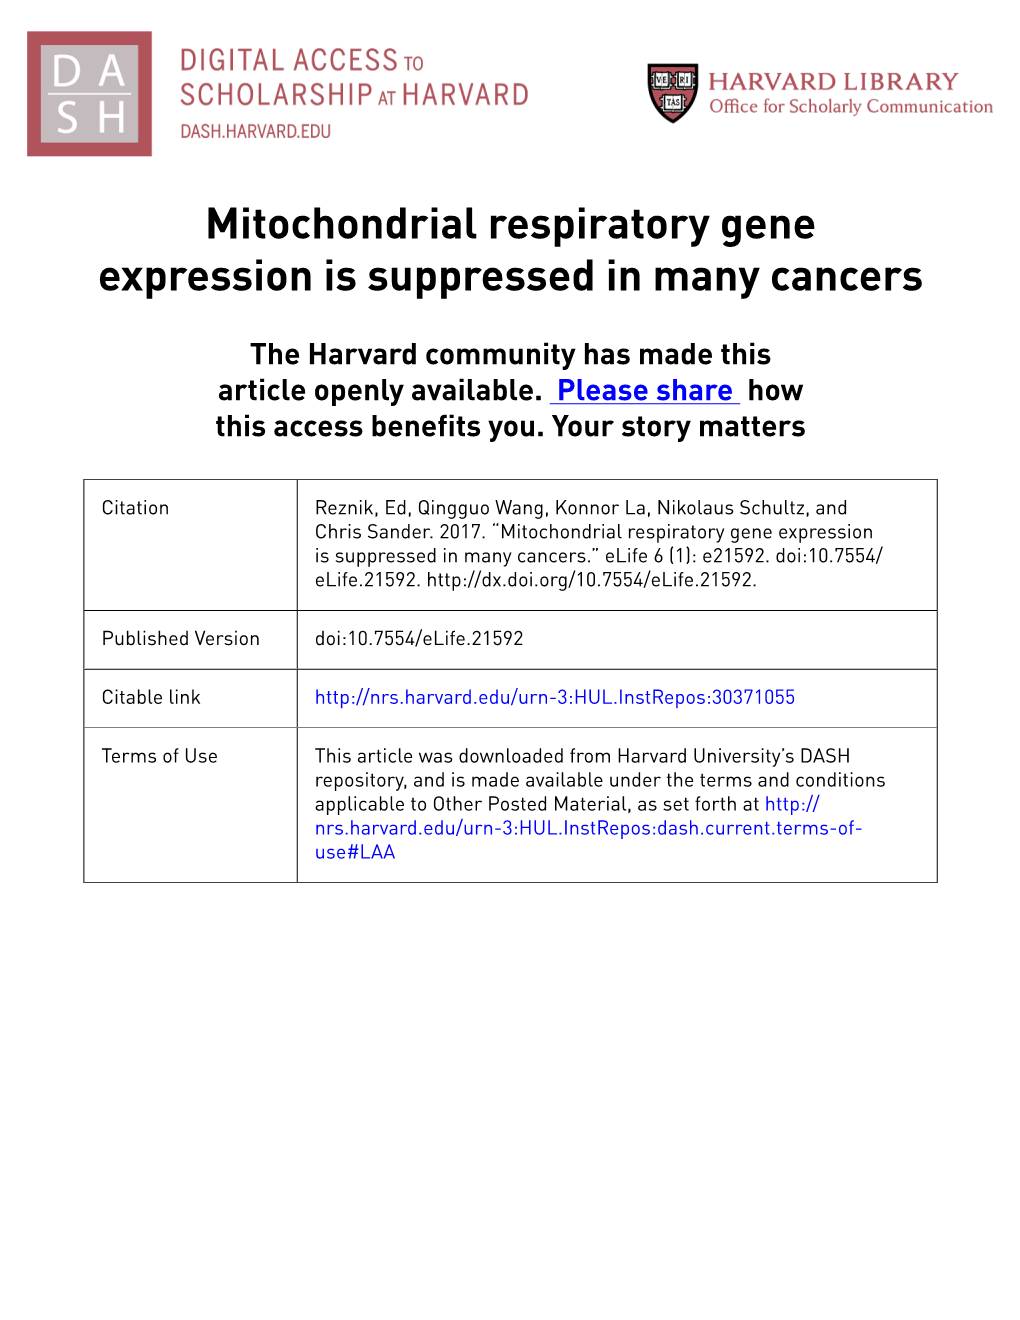 Mitochondrial Respiratory Gene Expression Is Suppressed in Many Cancers